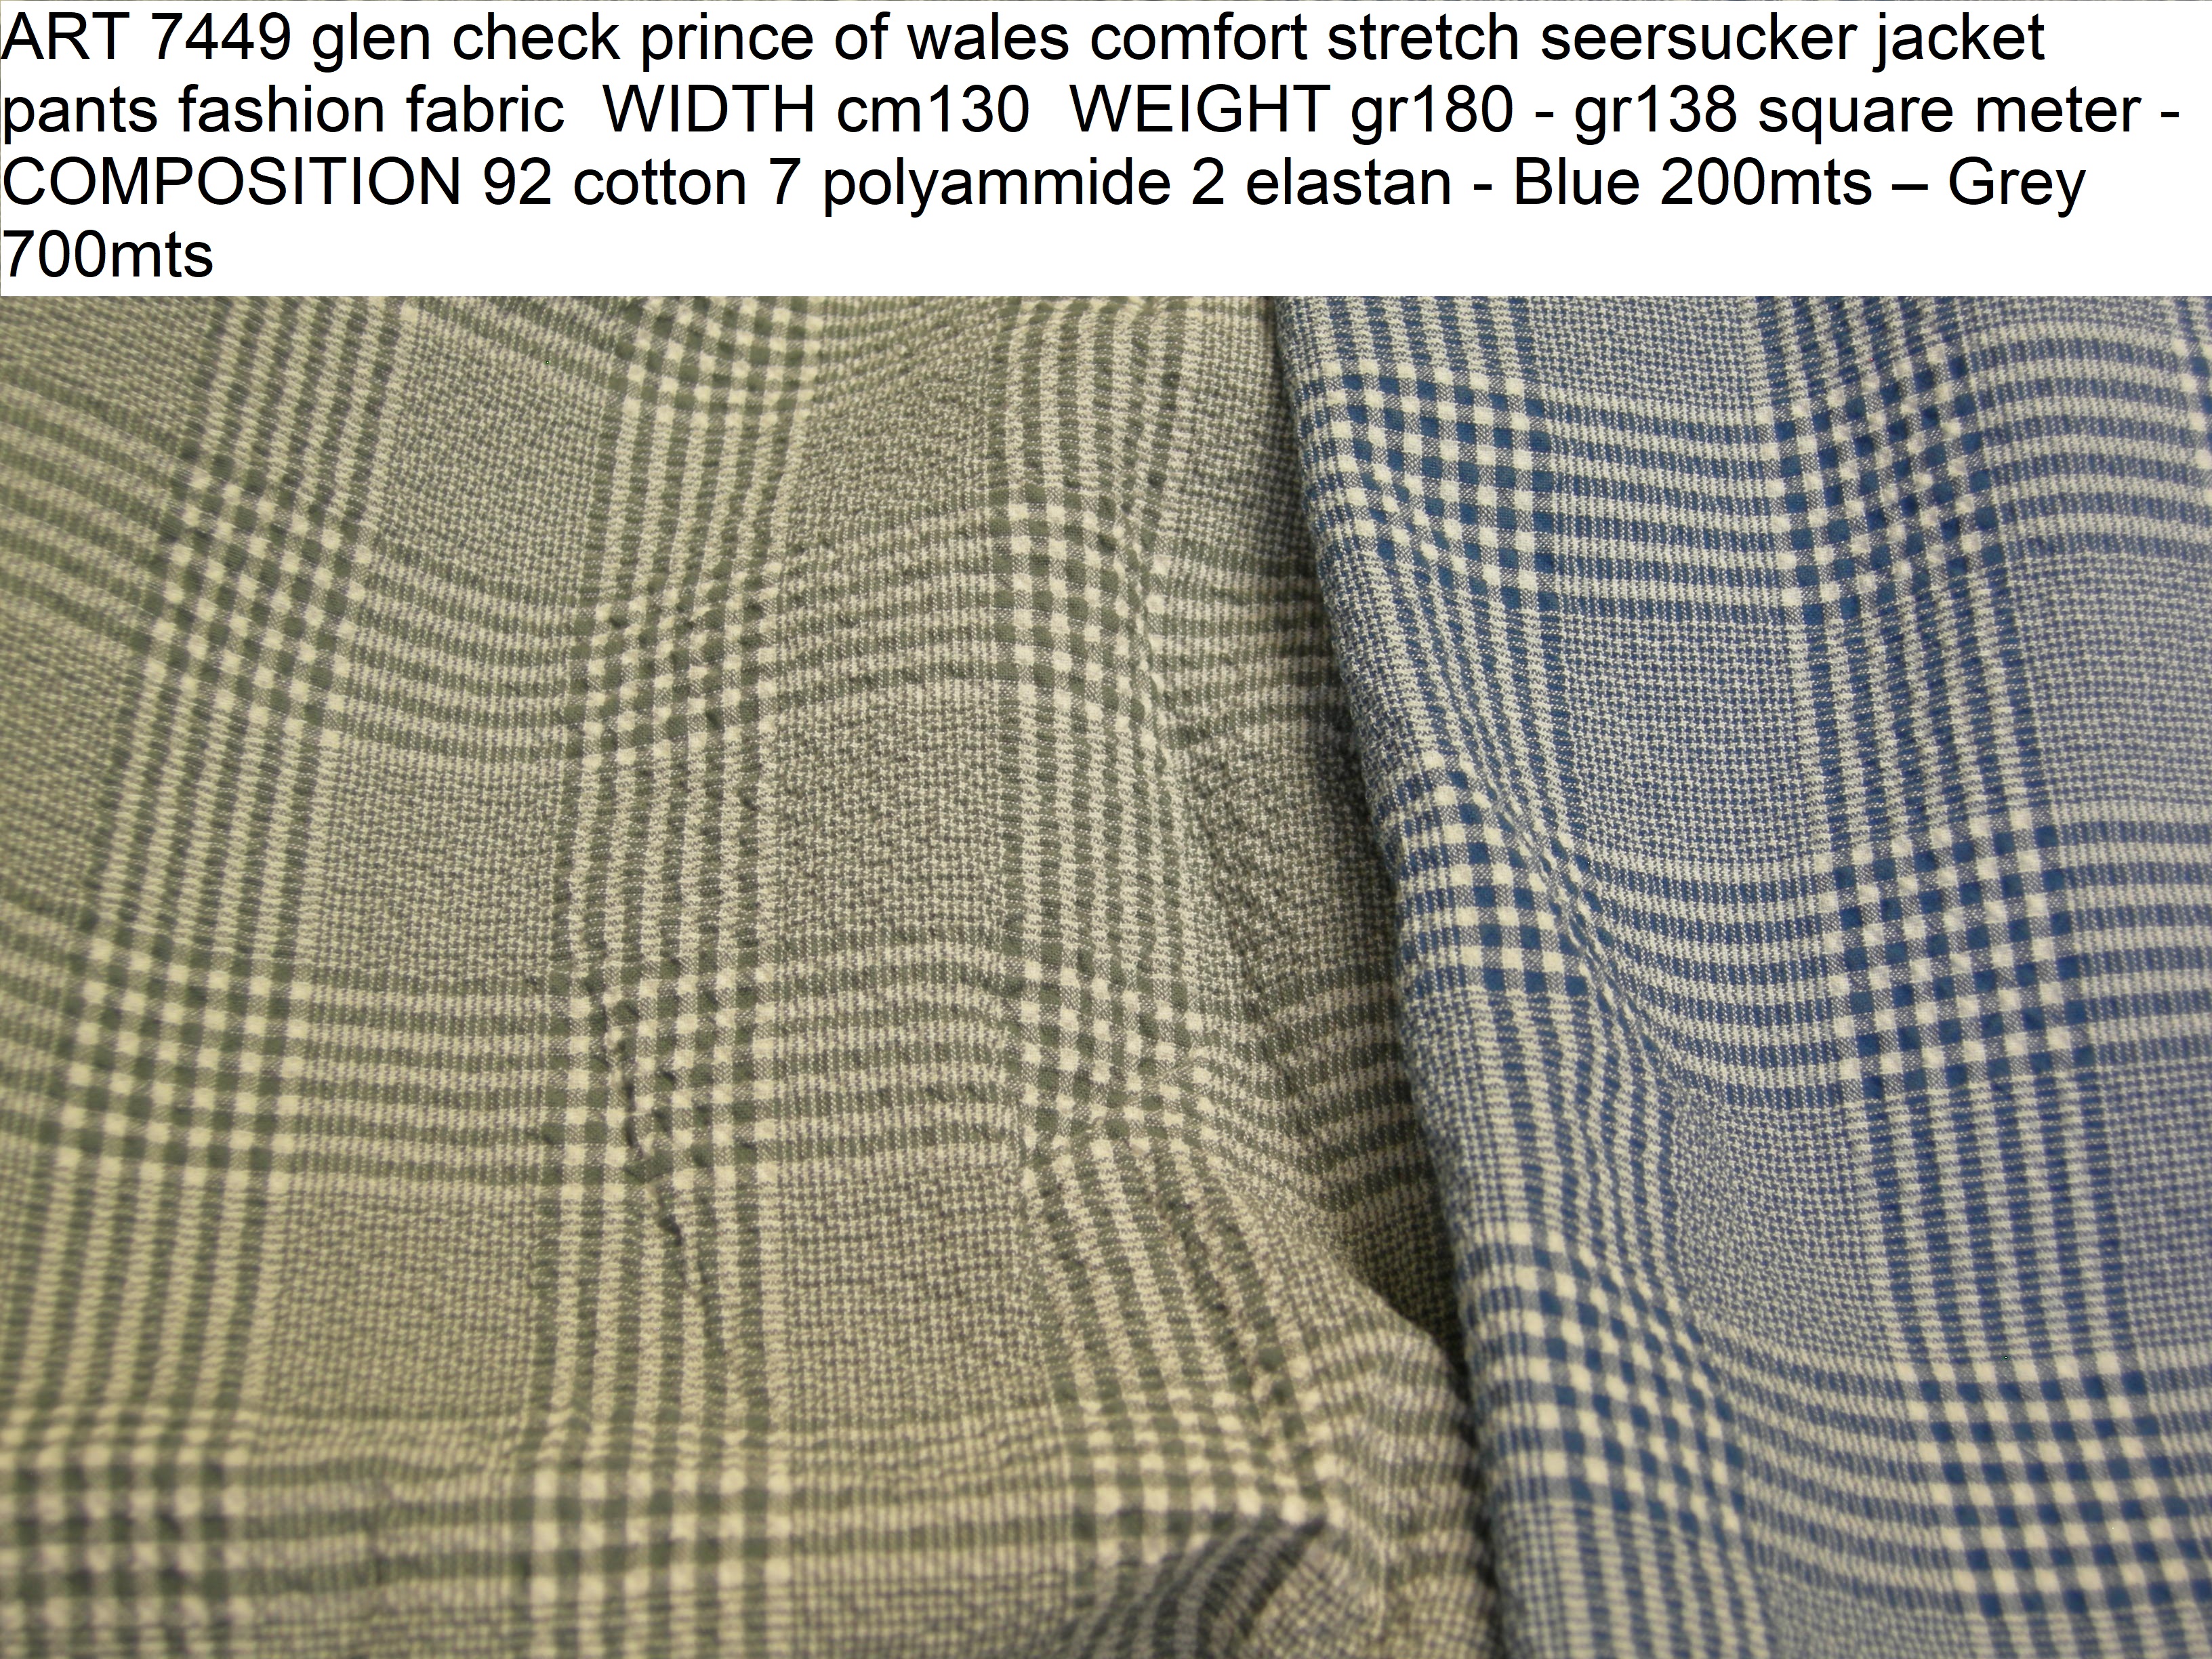 ART 7449 glen check prince of wales comfort stretch seersucker jacket pants fashion fabric WIDTH cm130 WEIGHT gr180 - gr138 square meter - Blue 200mts – Grey 700mts